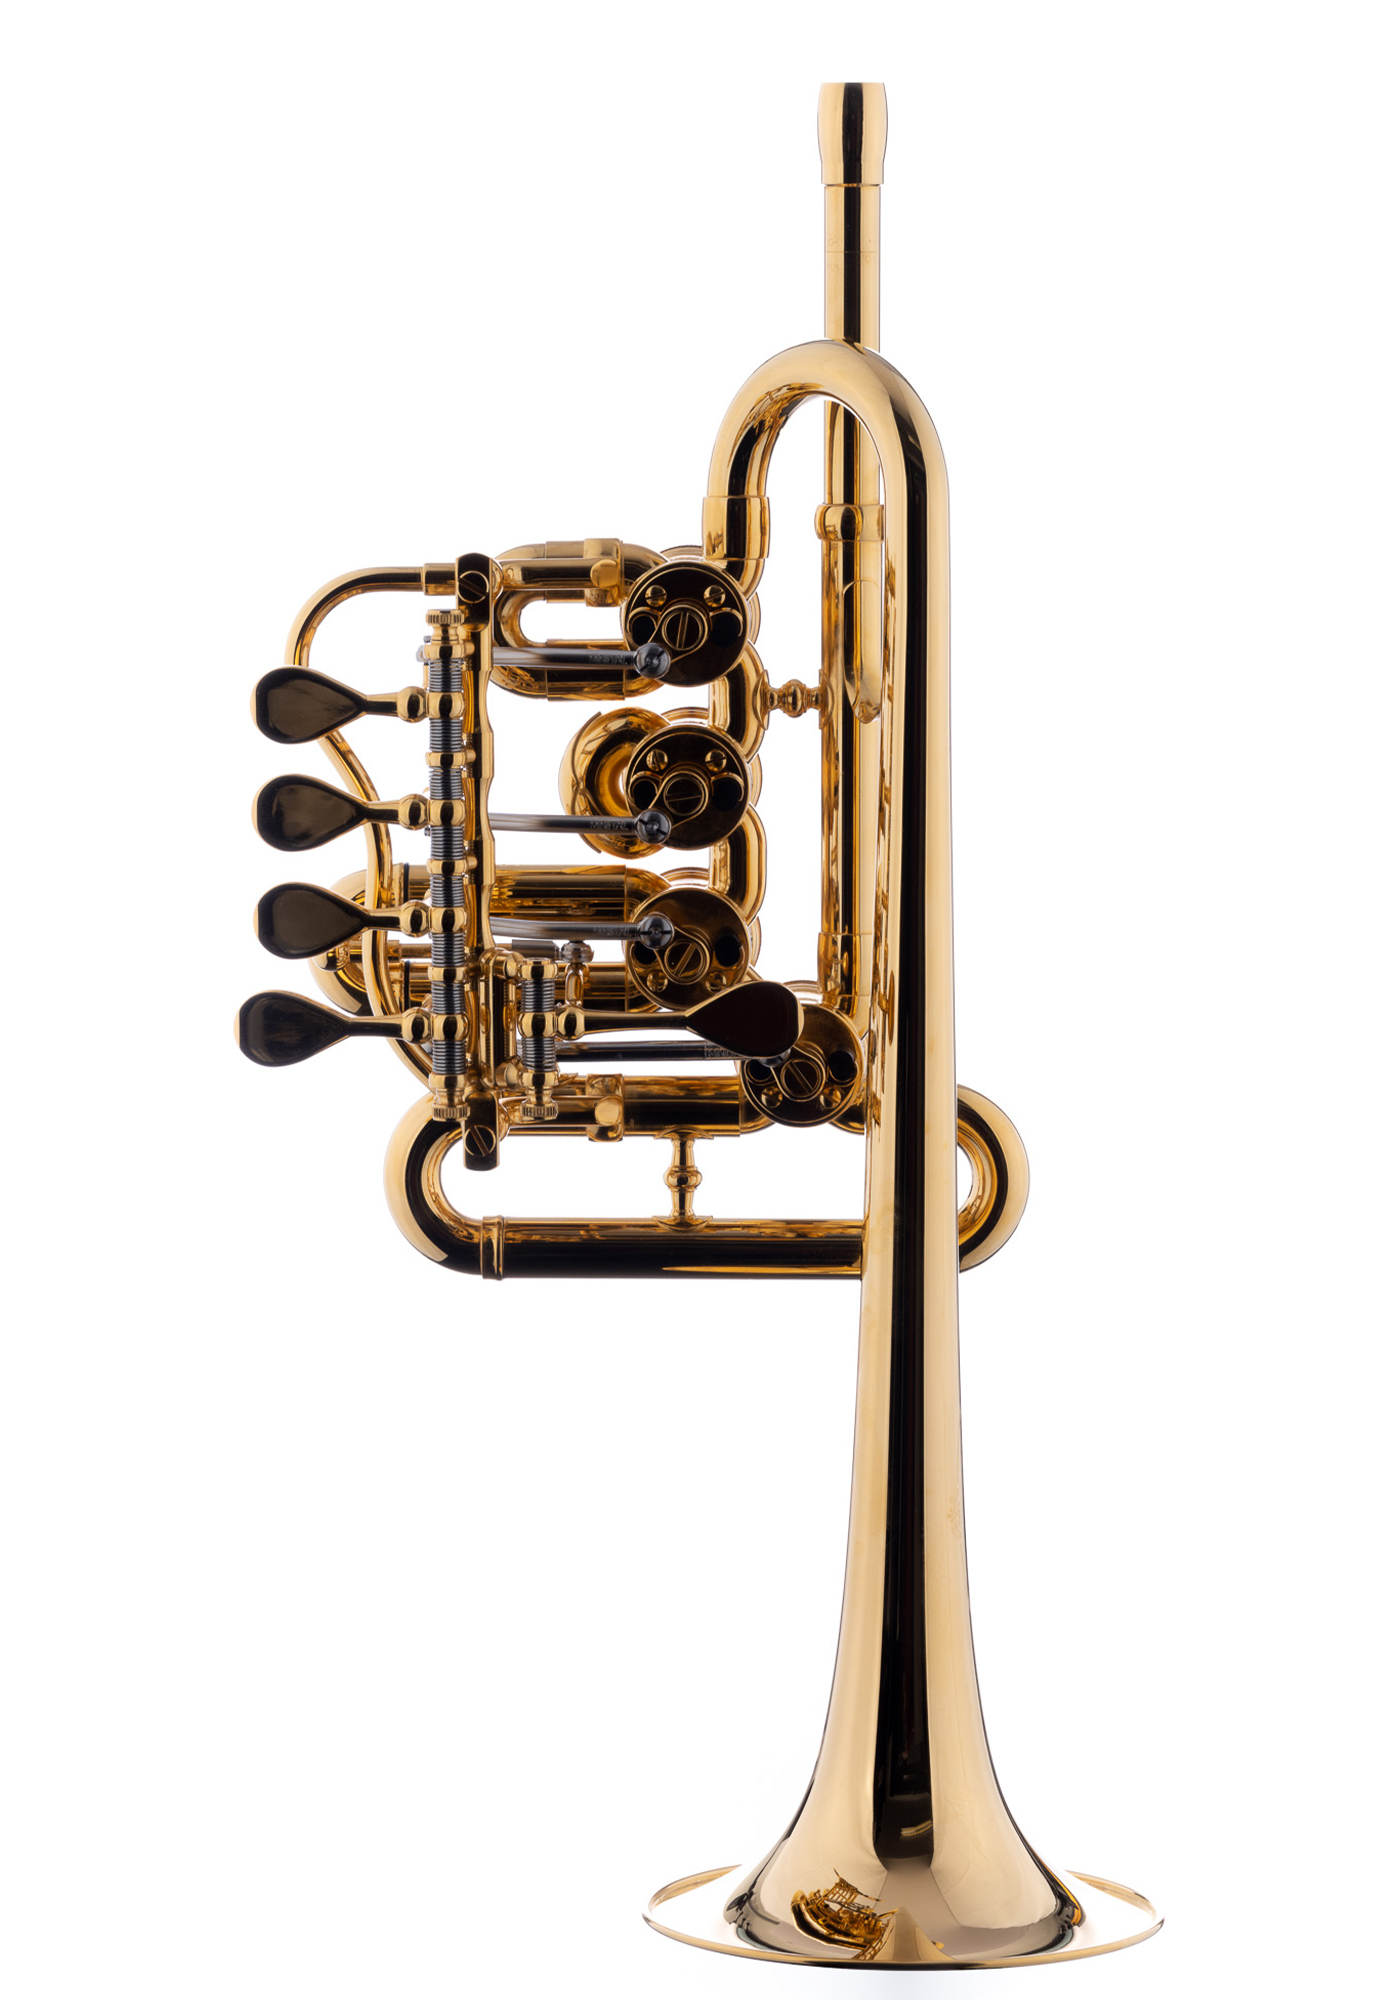 Schagerl Bb/A-Piccolotrumpet "BERLIN" gold plated